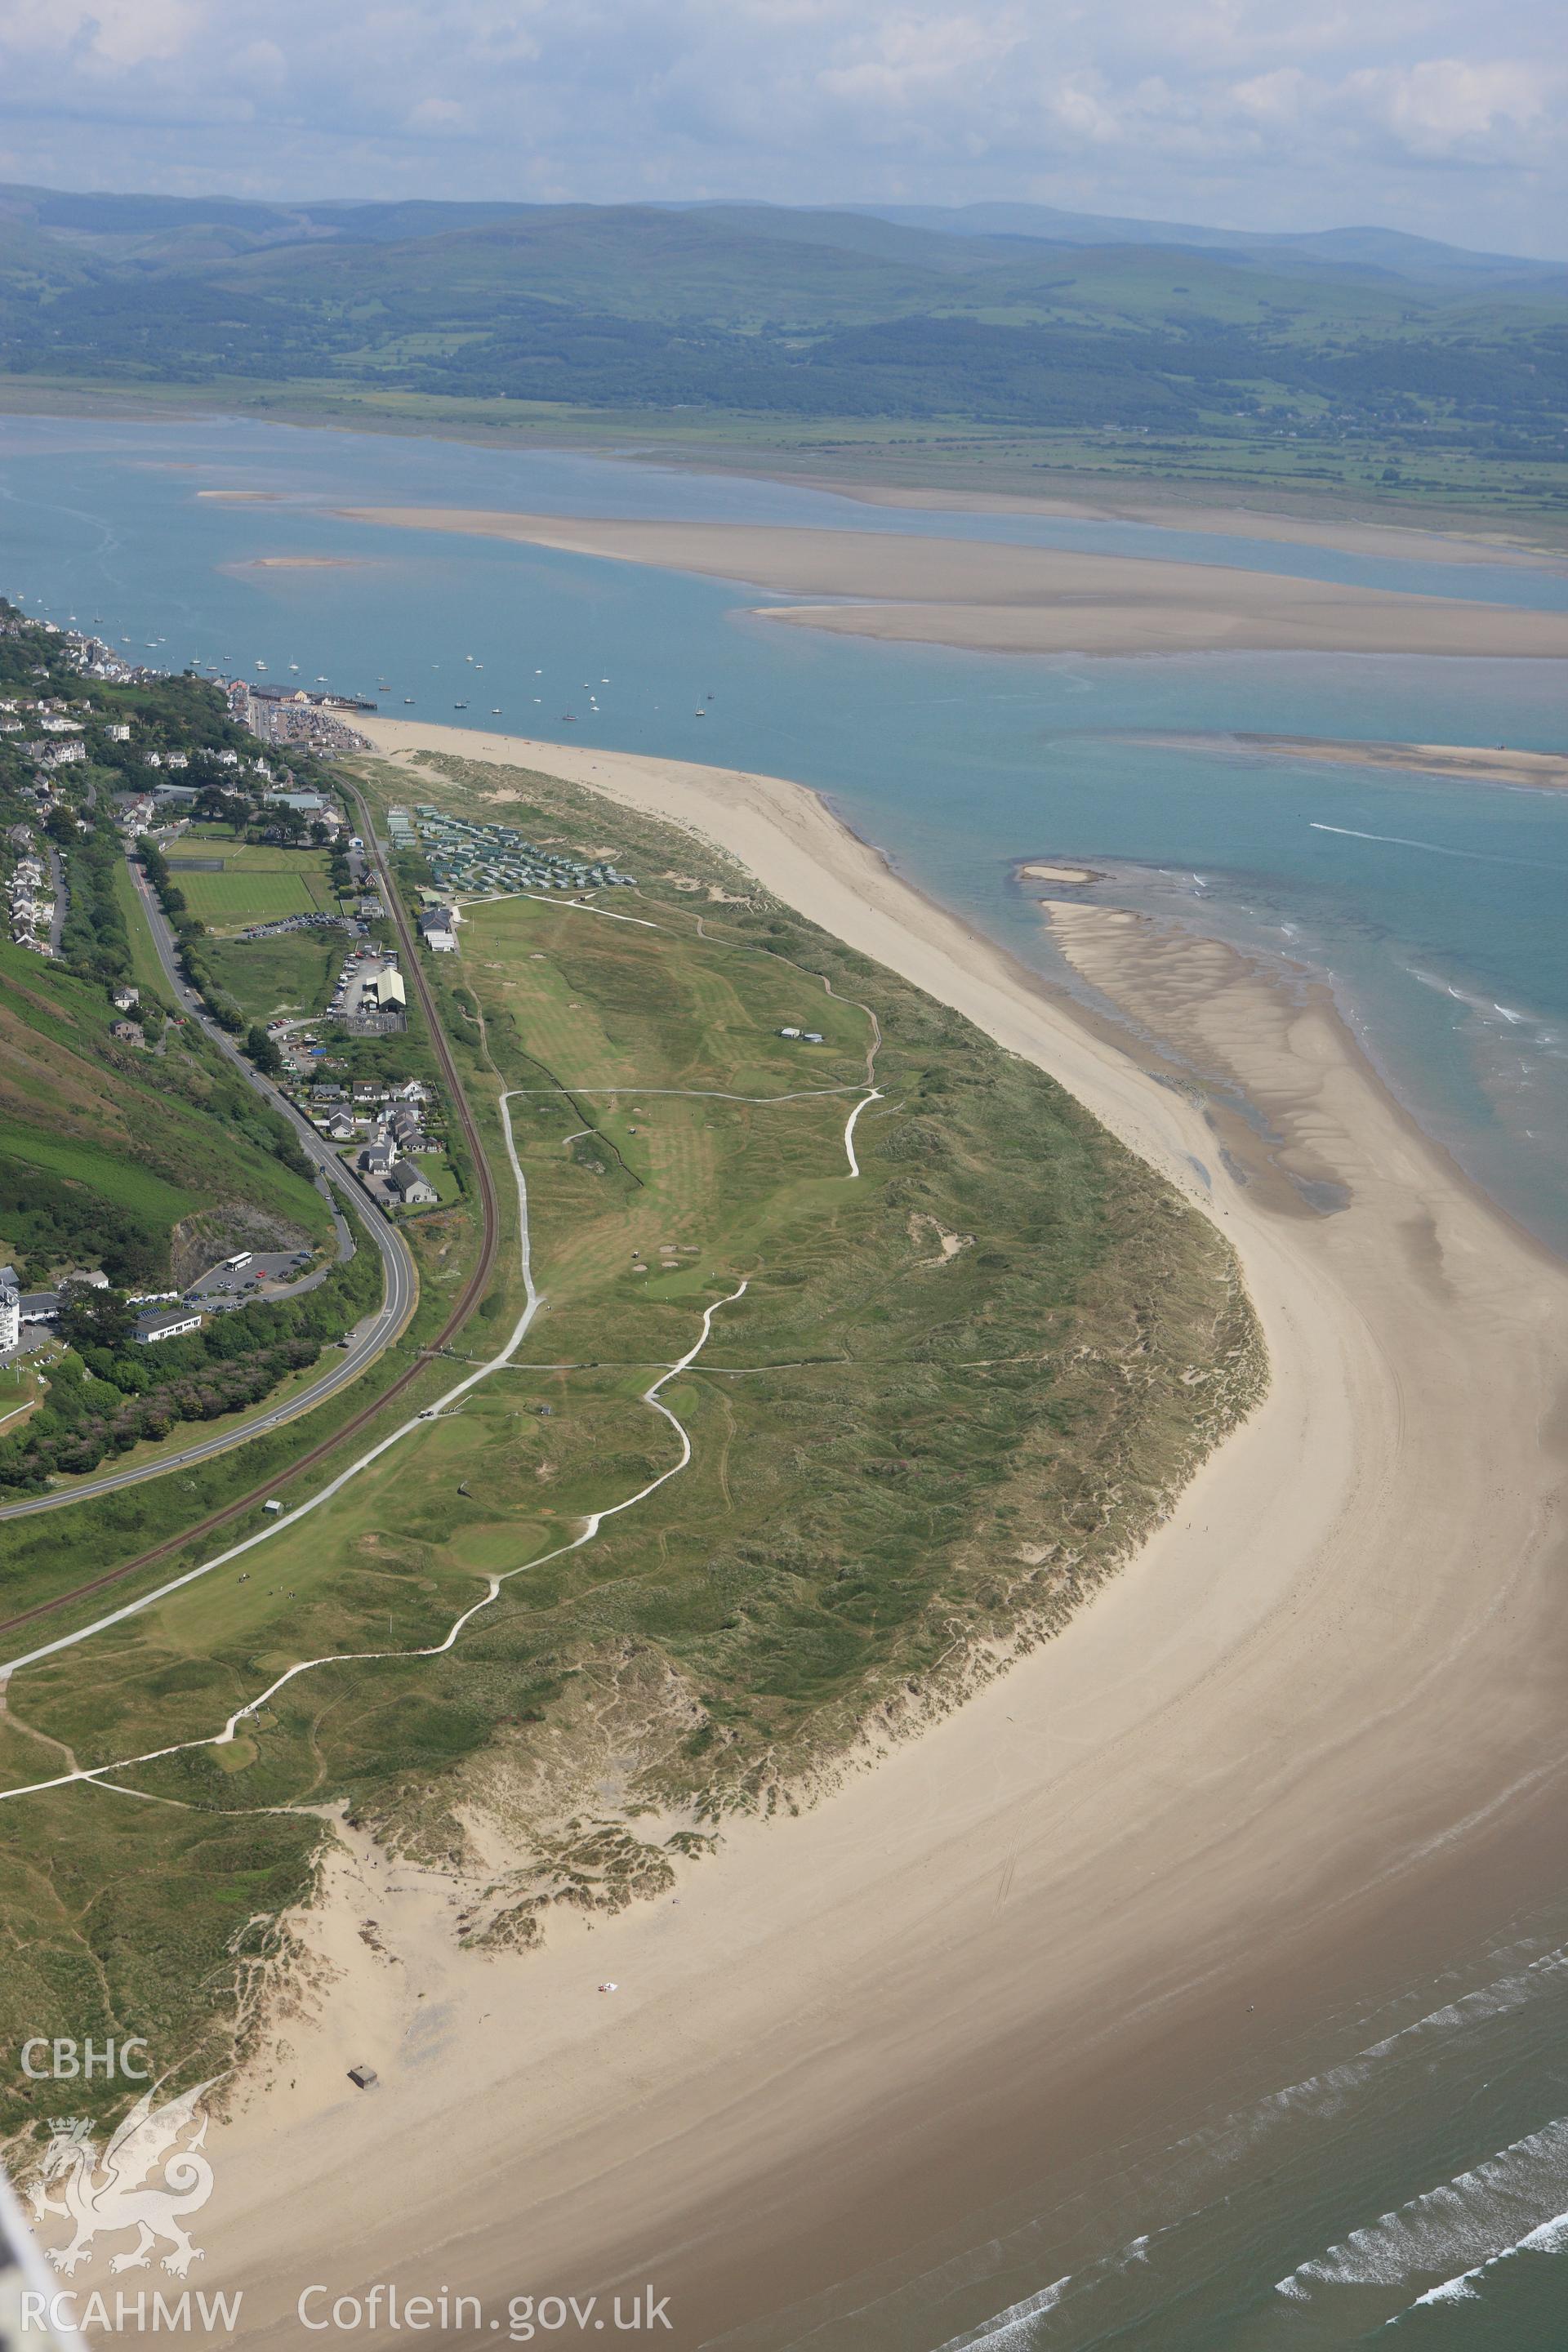 RCAHMW colour oblique aerial photograph of Aberdovey and the surrounding landscape. Taken on 16 June 2009 by Toby Driver